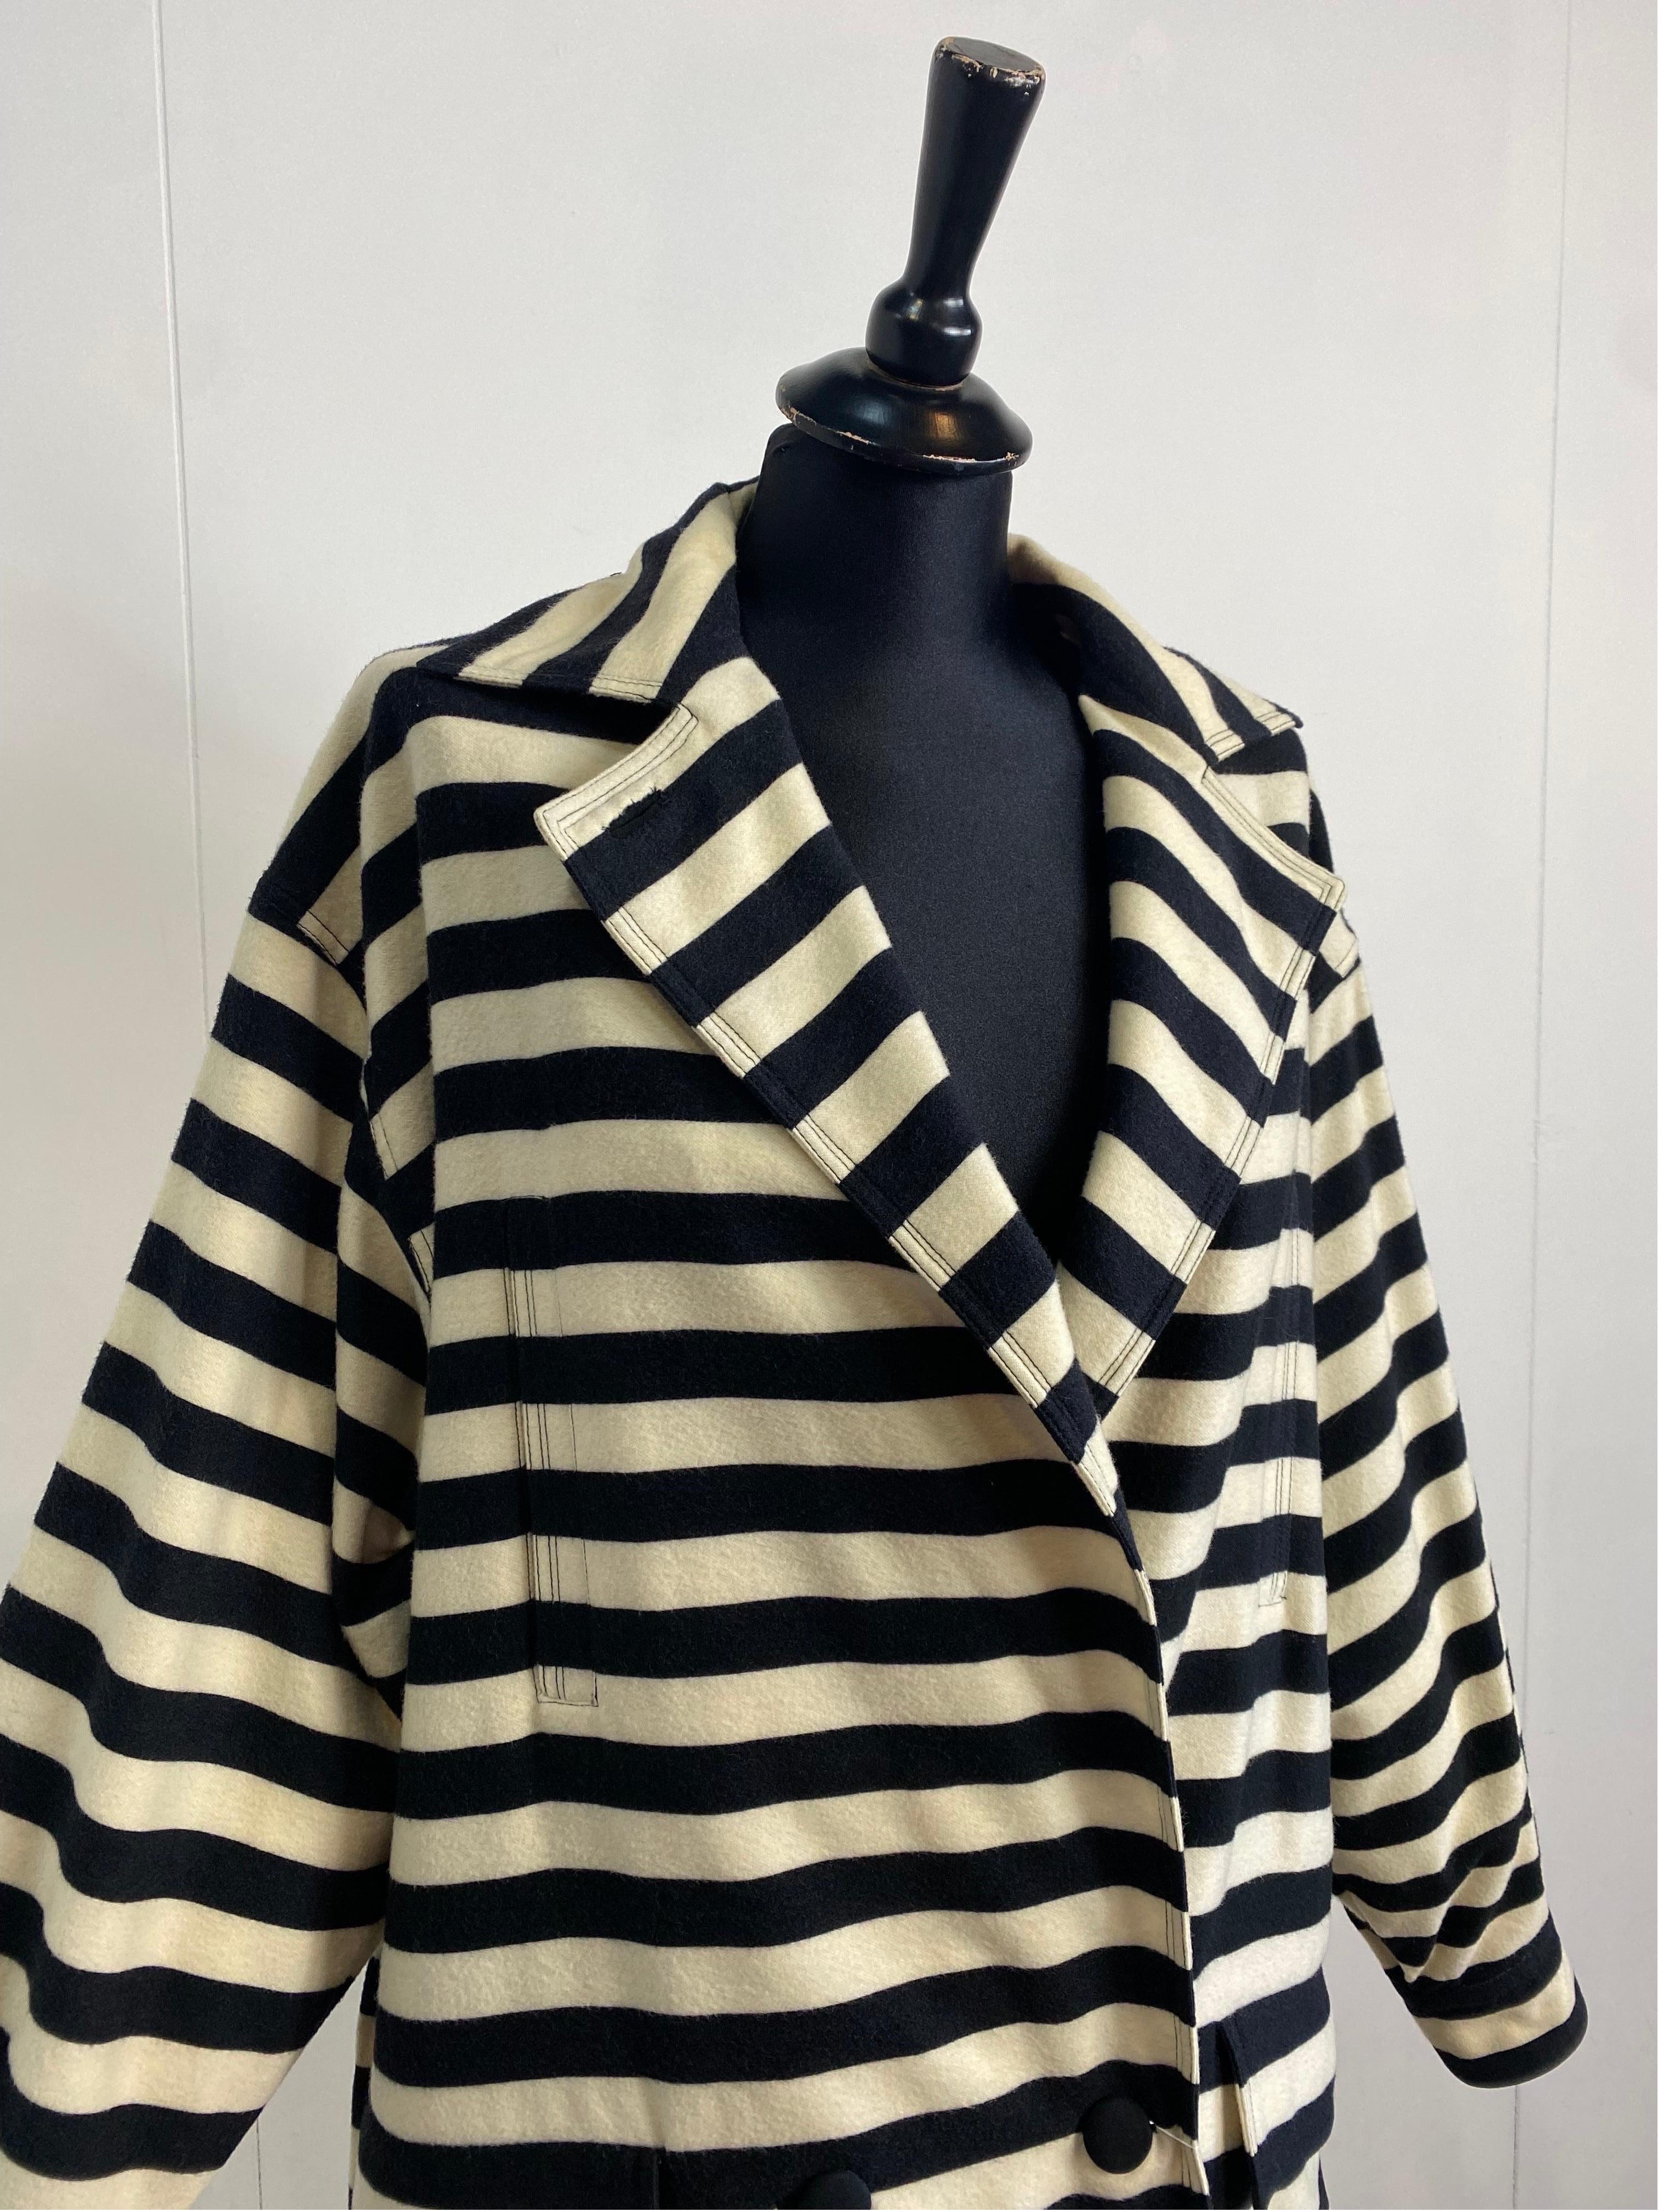 Gianni Versace striped jacket.
Vintage piece. 90s.
Composition label missing but we think it is a wool blend.
Italian size 42 with oversized fit
Shoulders 52 cm
Bust 58 cm
Length 85 cm
Sleeve 54 cm
In good general condition, with signs of normal use